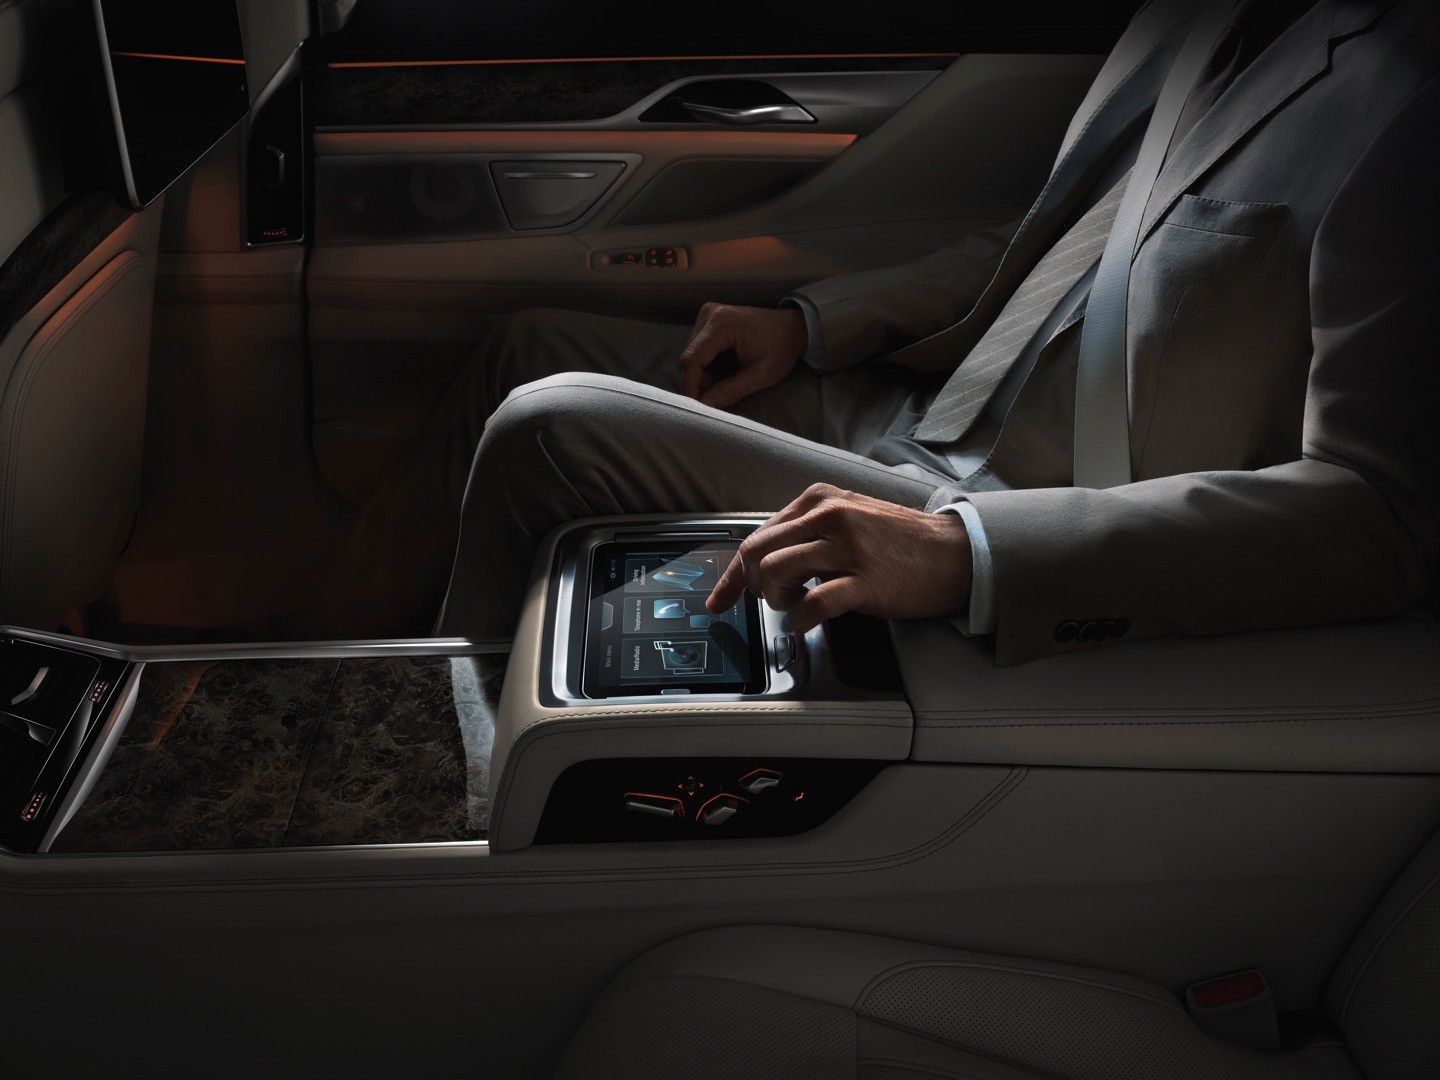 2016-bmw-7-series-finally-officially-unveiled-the-good-stuffs-inside-photo-gallery_90